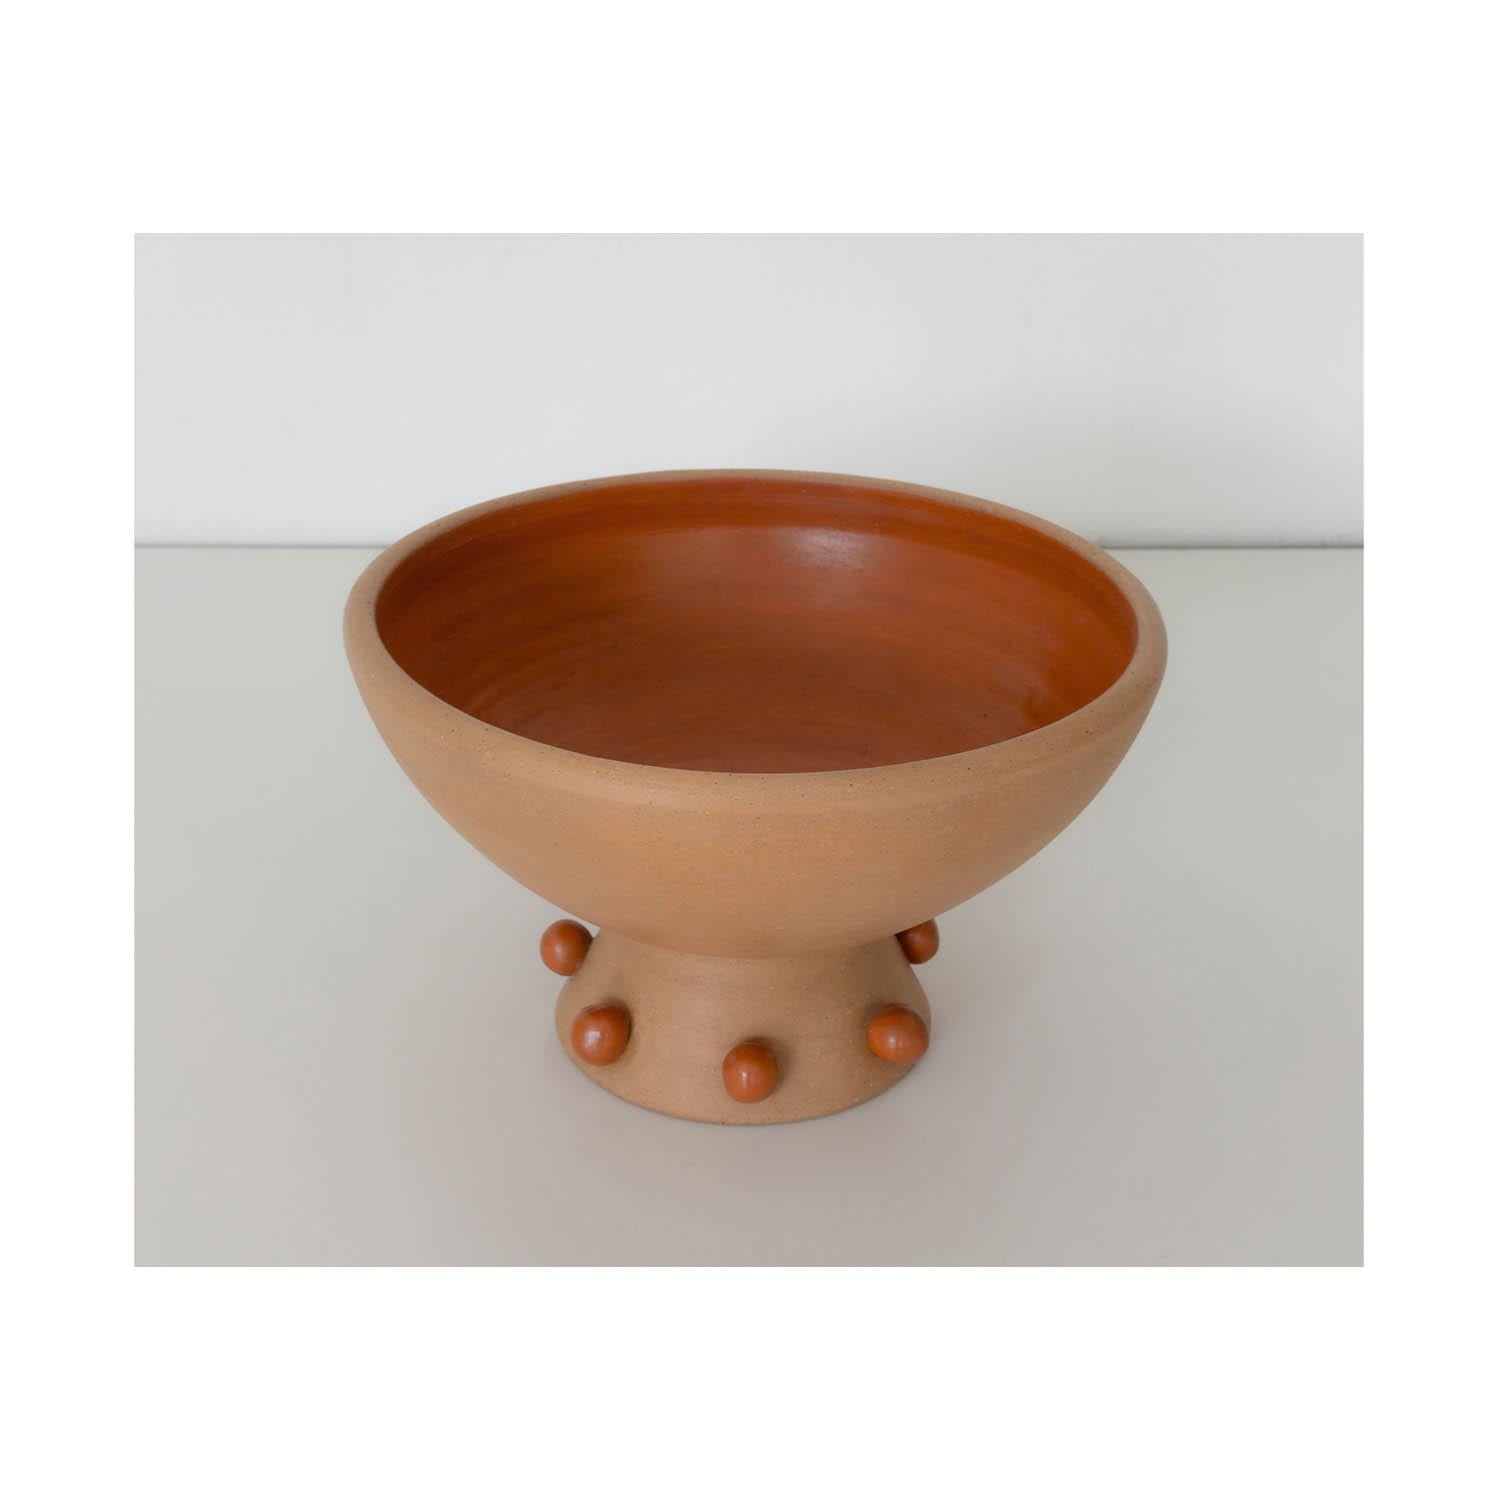 Pottery Decorative Clay Bowl/Vase Danzante 01. Smooth Soft Clay Finish. By Raíz Mx For Sale